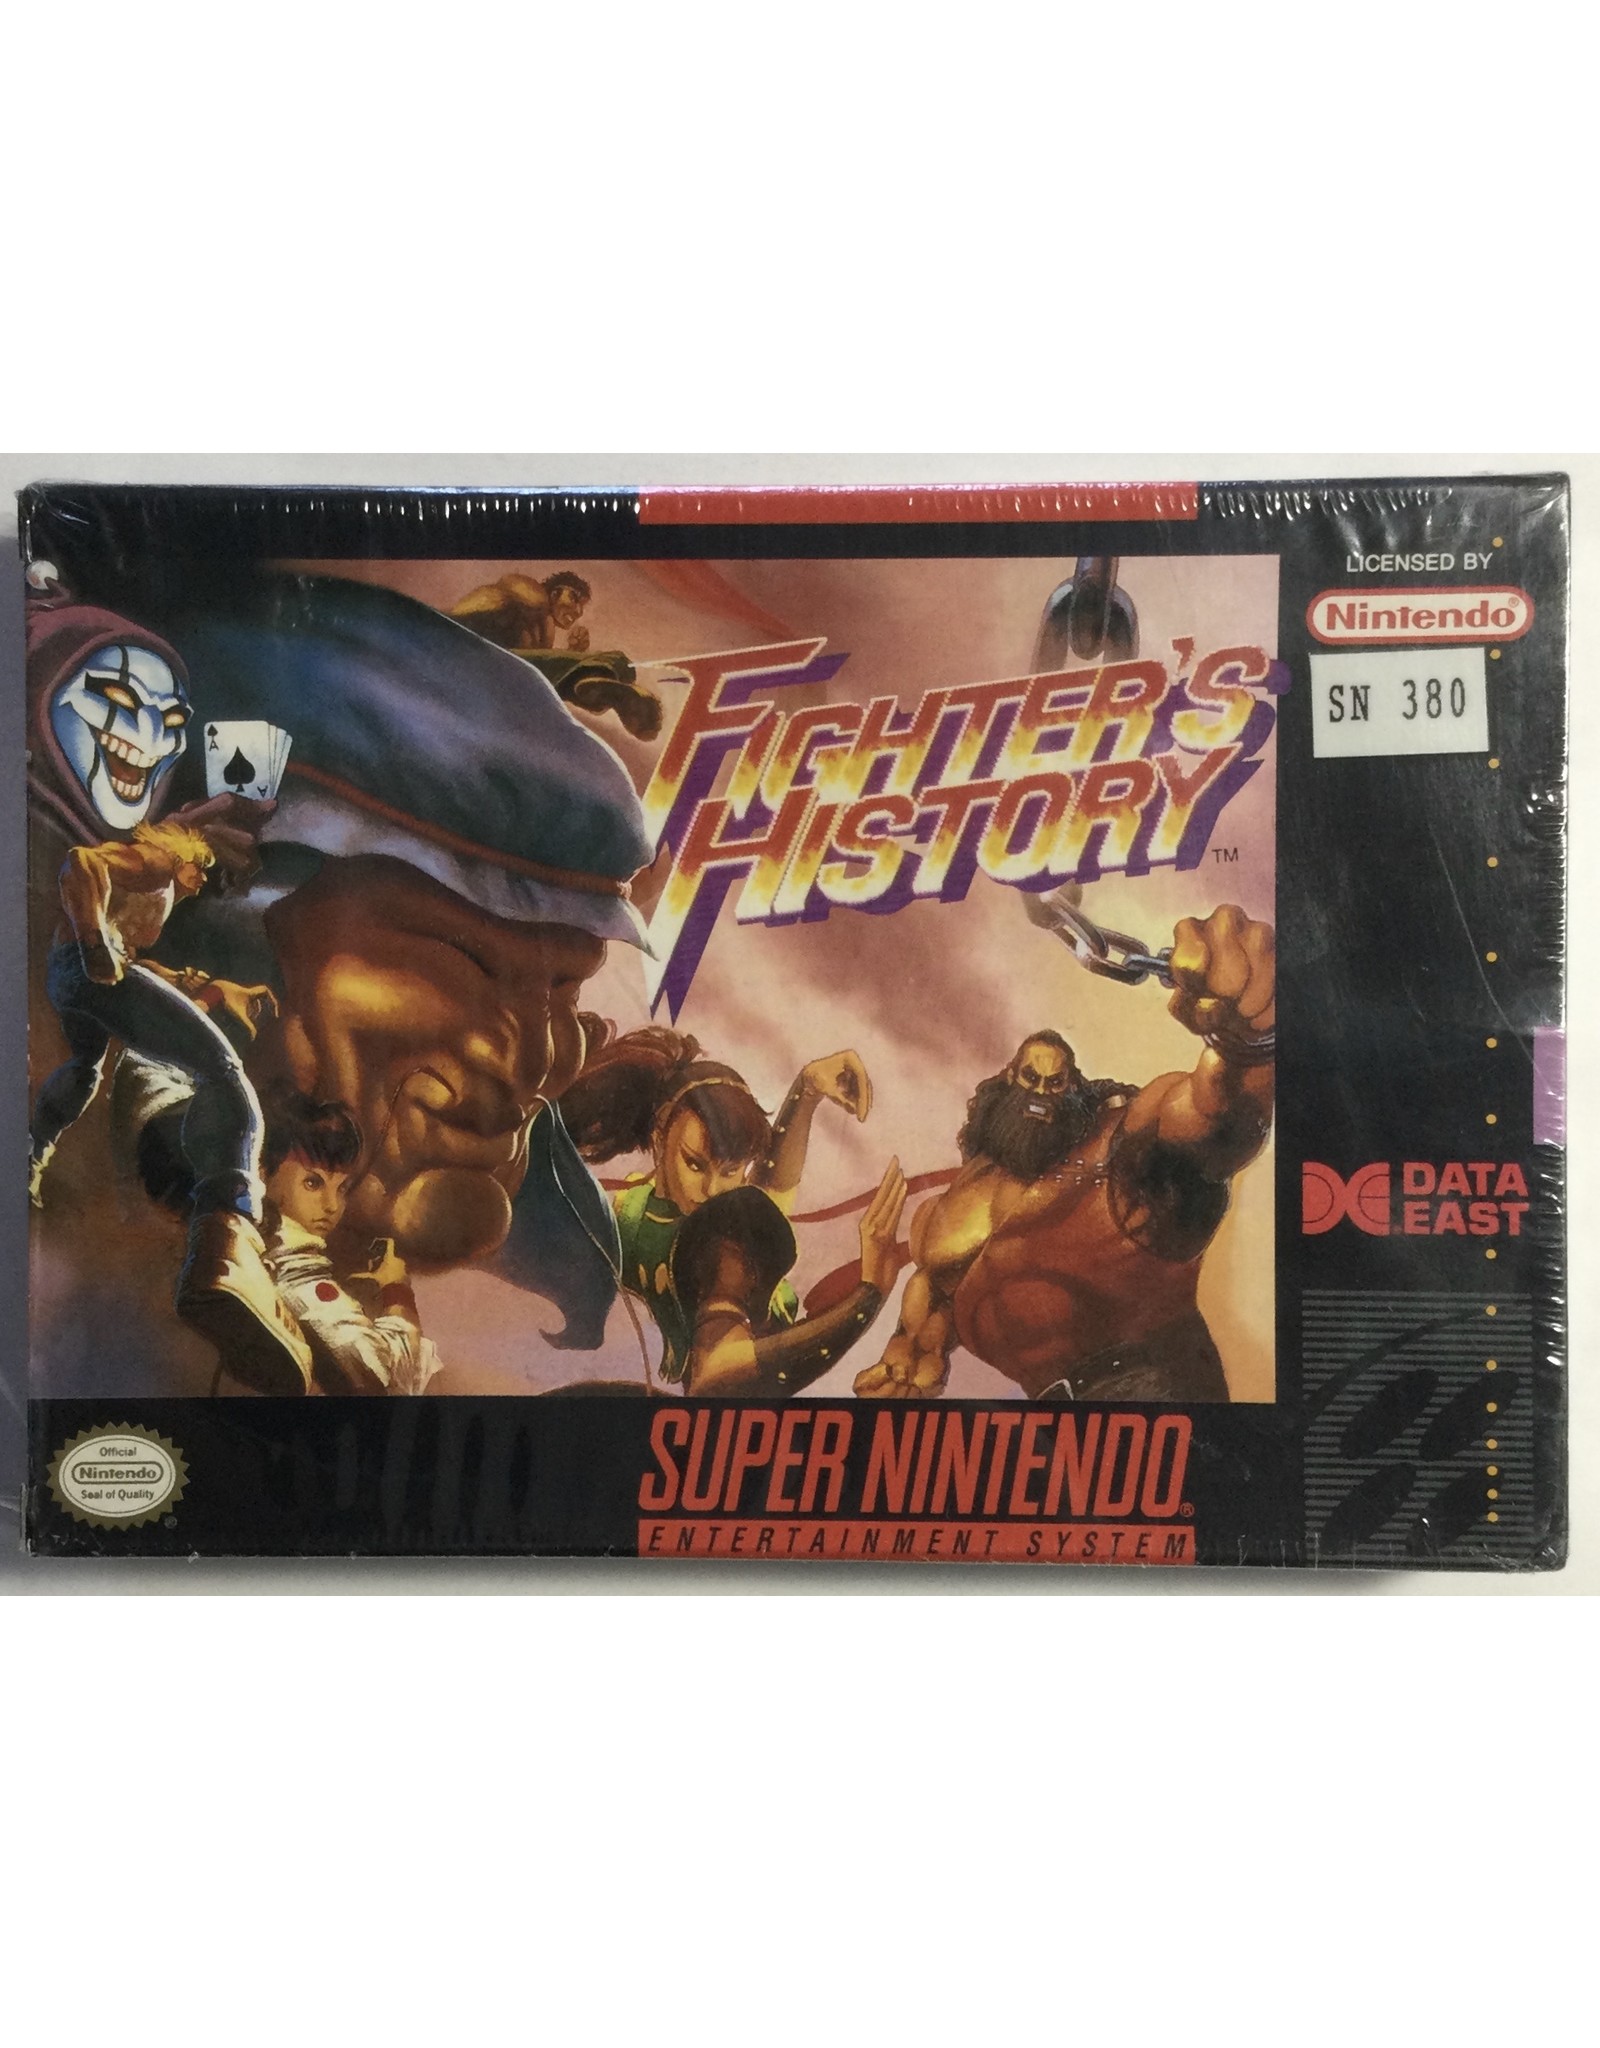 DATA EAST Fighter's History for Super Nintendo Entertainment System (SNES) - CIB